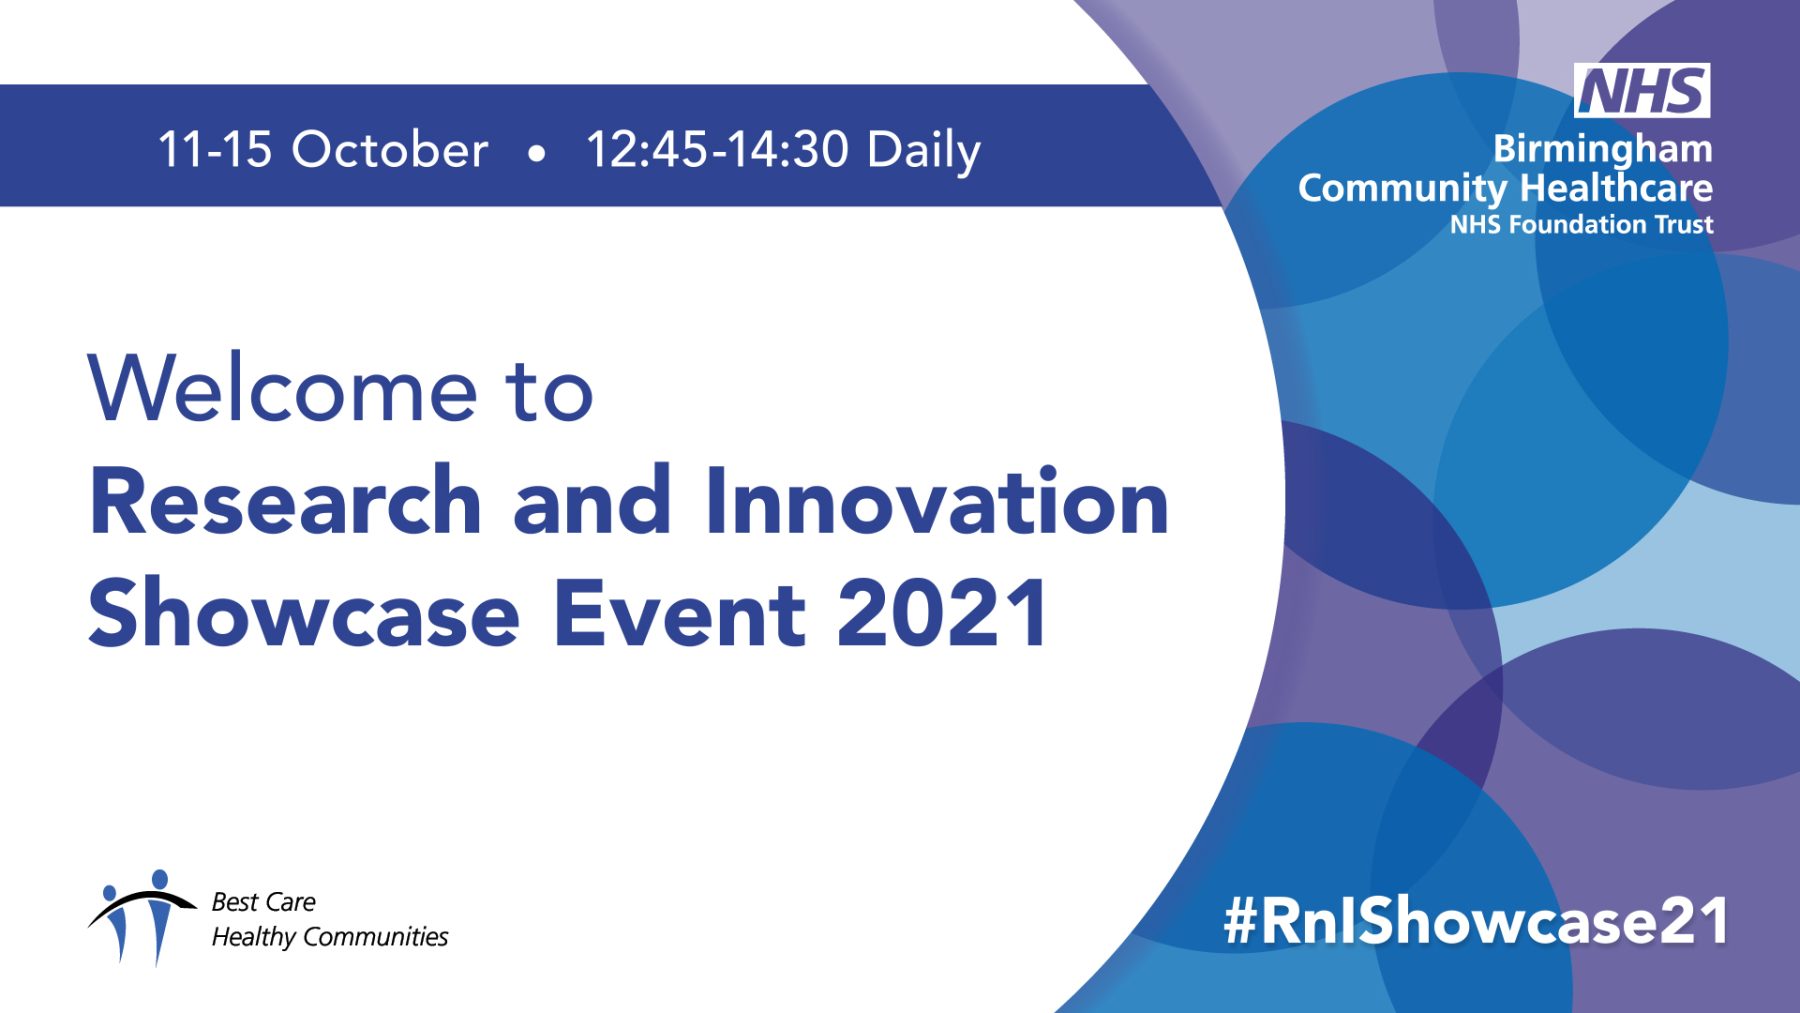 Research and Innovation Showcase Event 2021